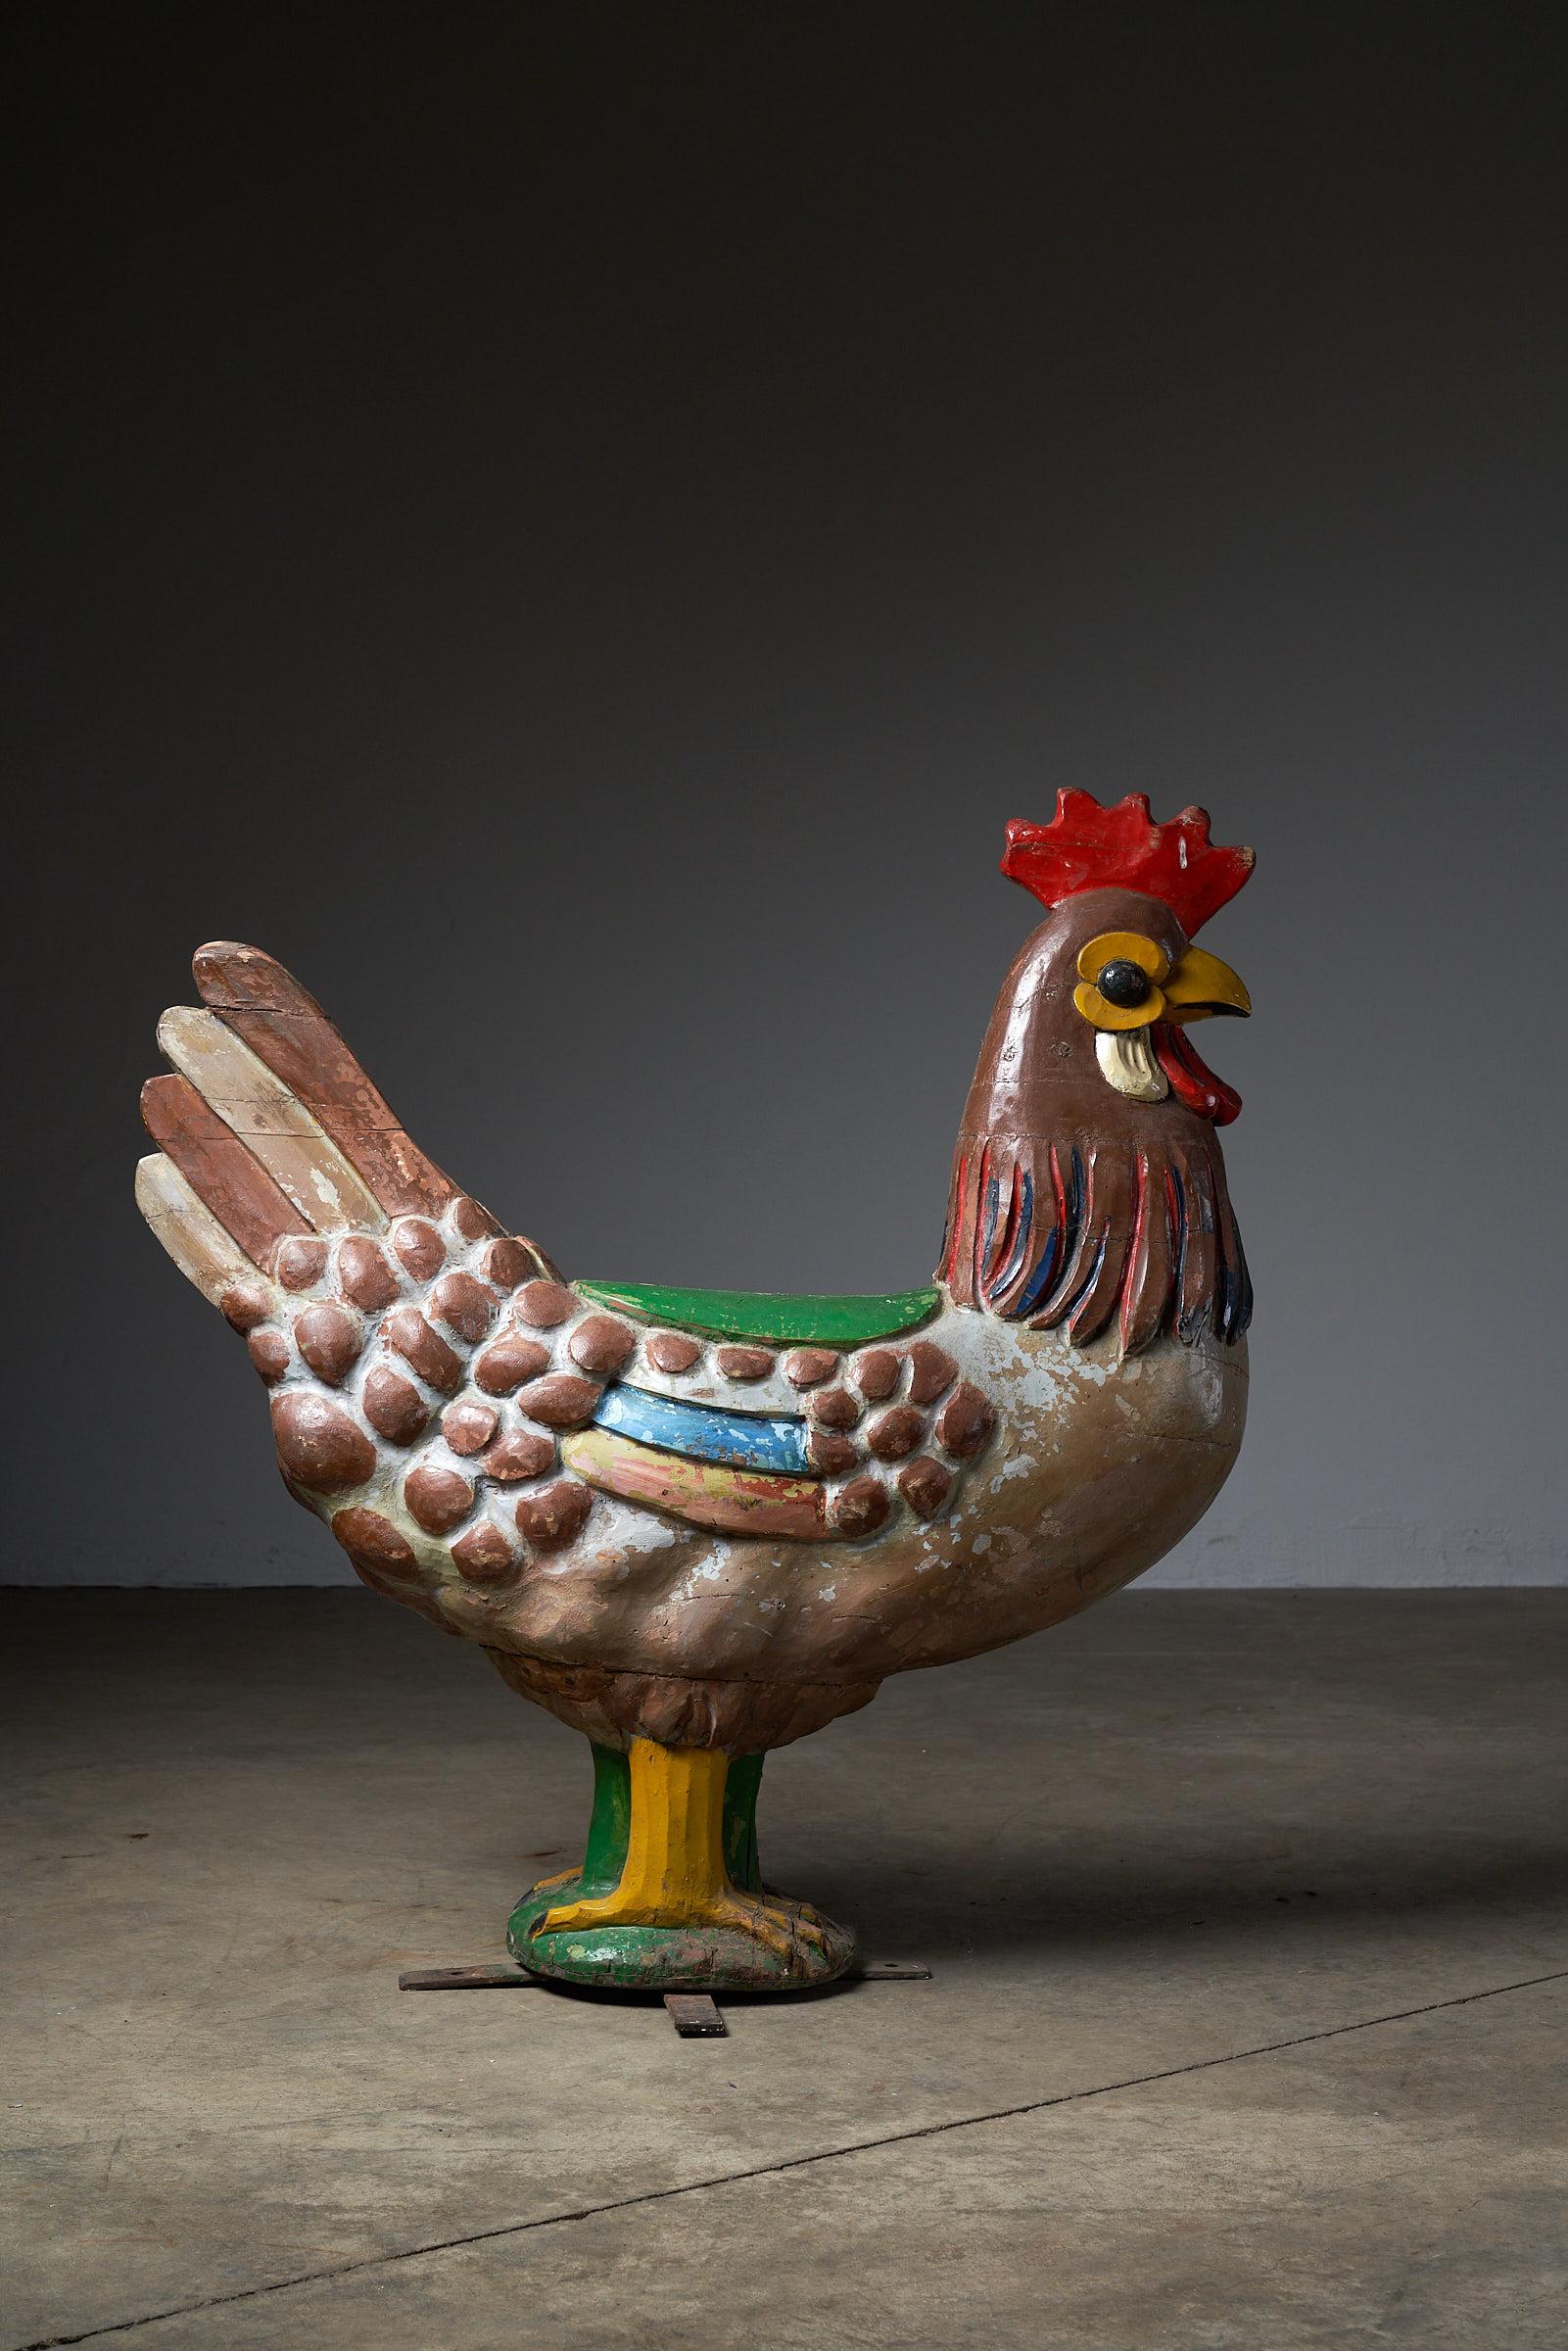 Behold the charm of this antique carousel figure featuring a beautifully carved rooster. Crafted from wood and mounted on a sturdy metal base, this vintage piece adds a touch of rustic elegance. The vibrant colors and detailed carving make it a